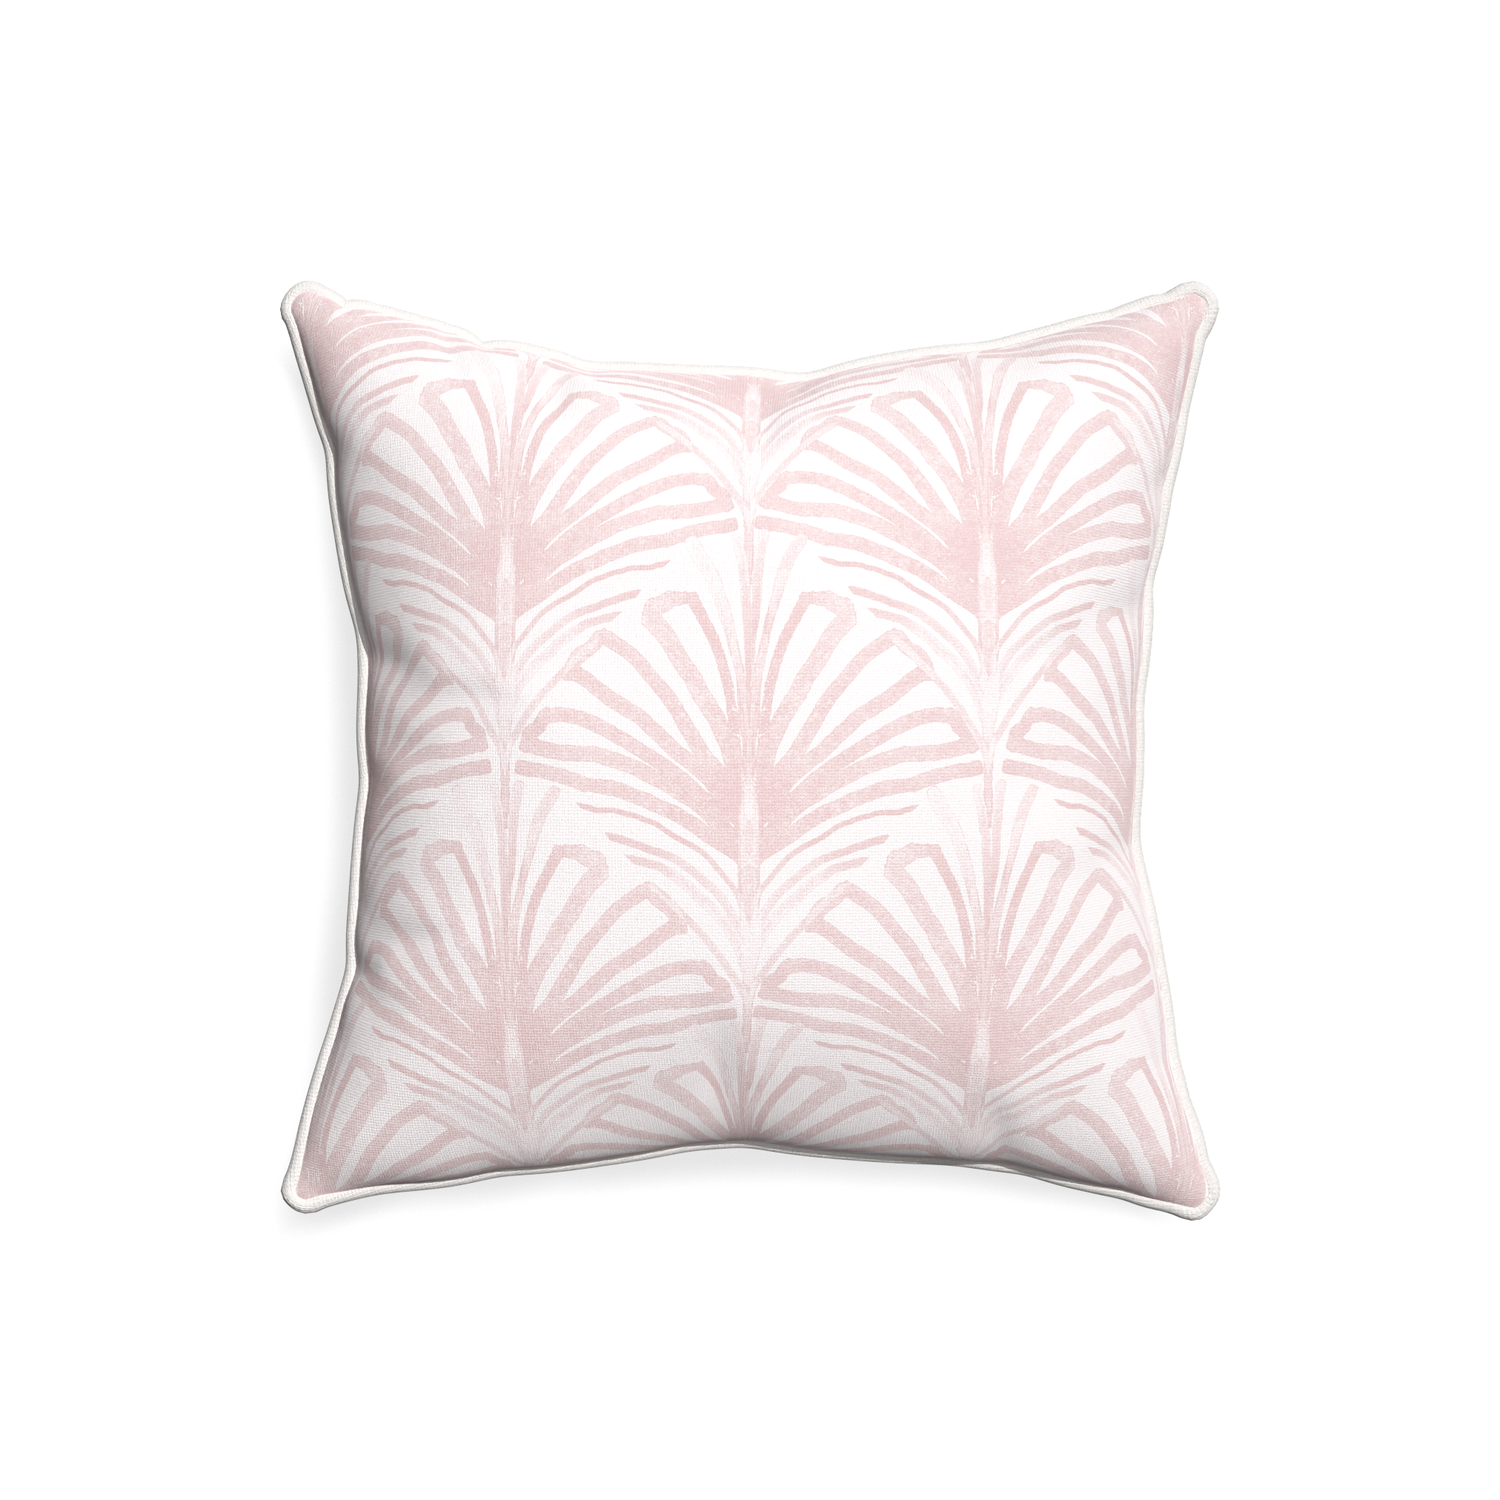 20-square suzy rose custom pillow with snow piping on white background